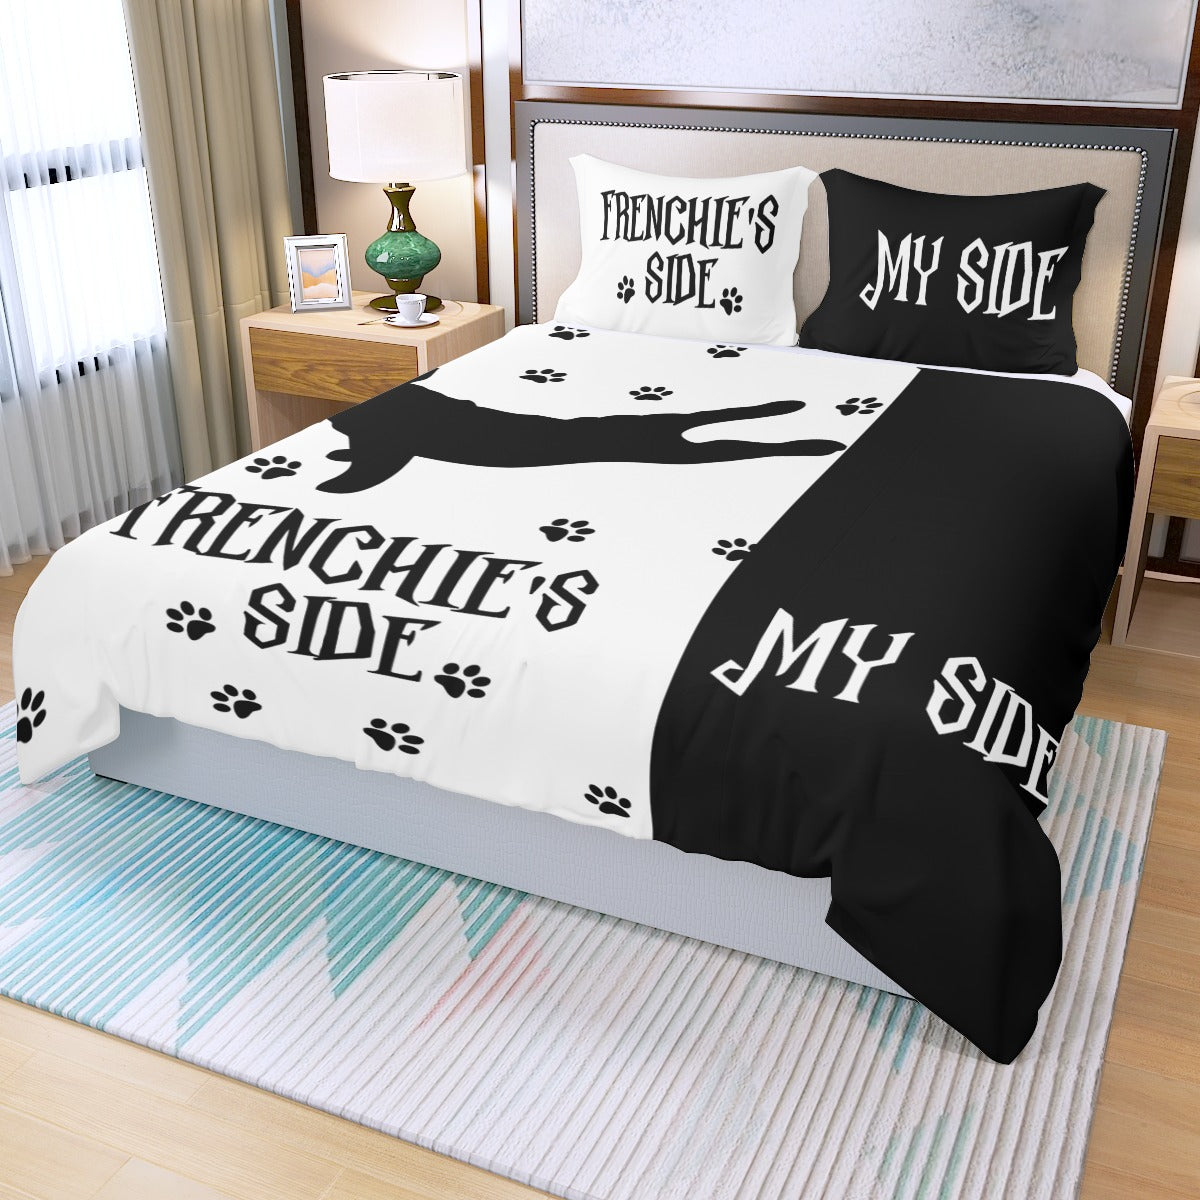 Frenchie's Side 3-Piece Duvet Cover Set